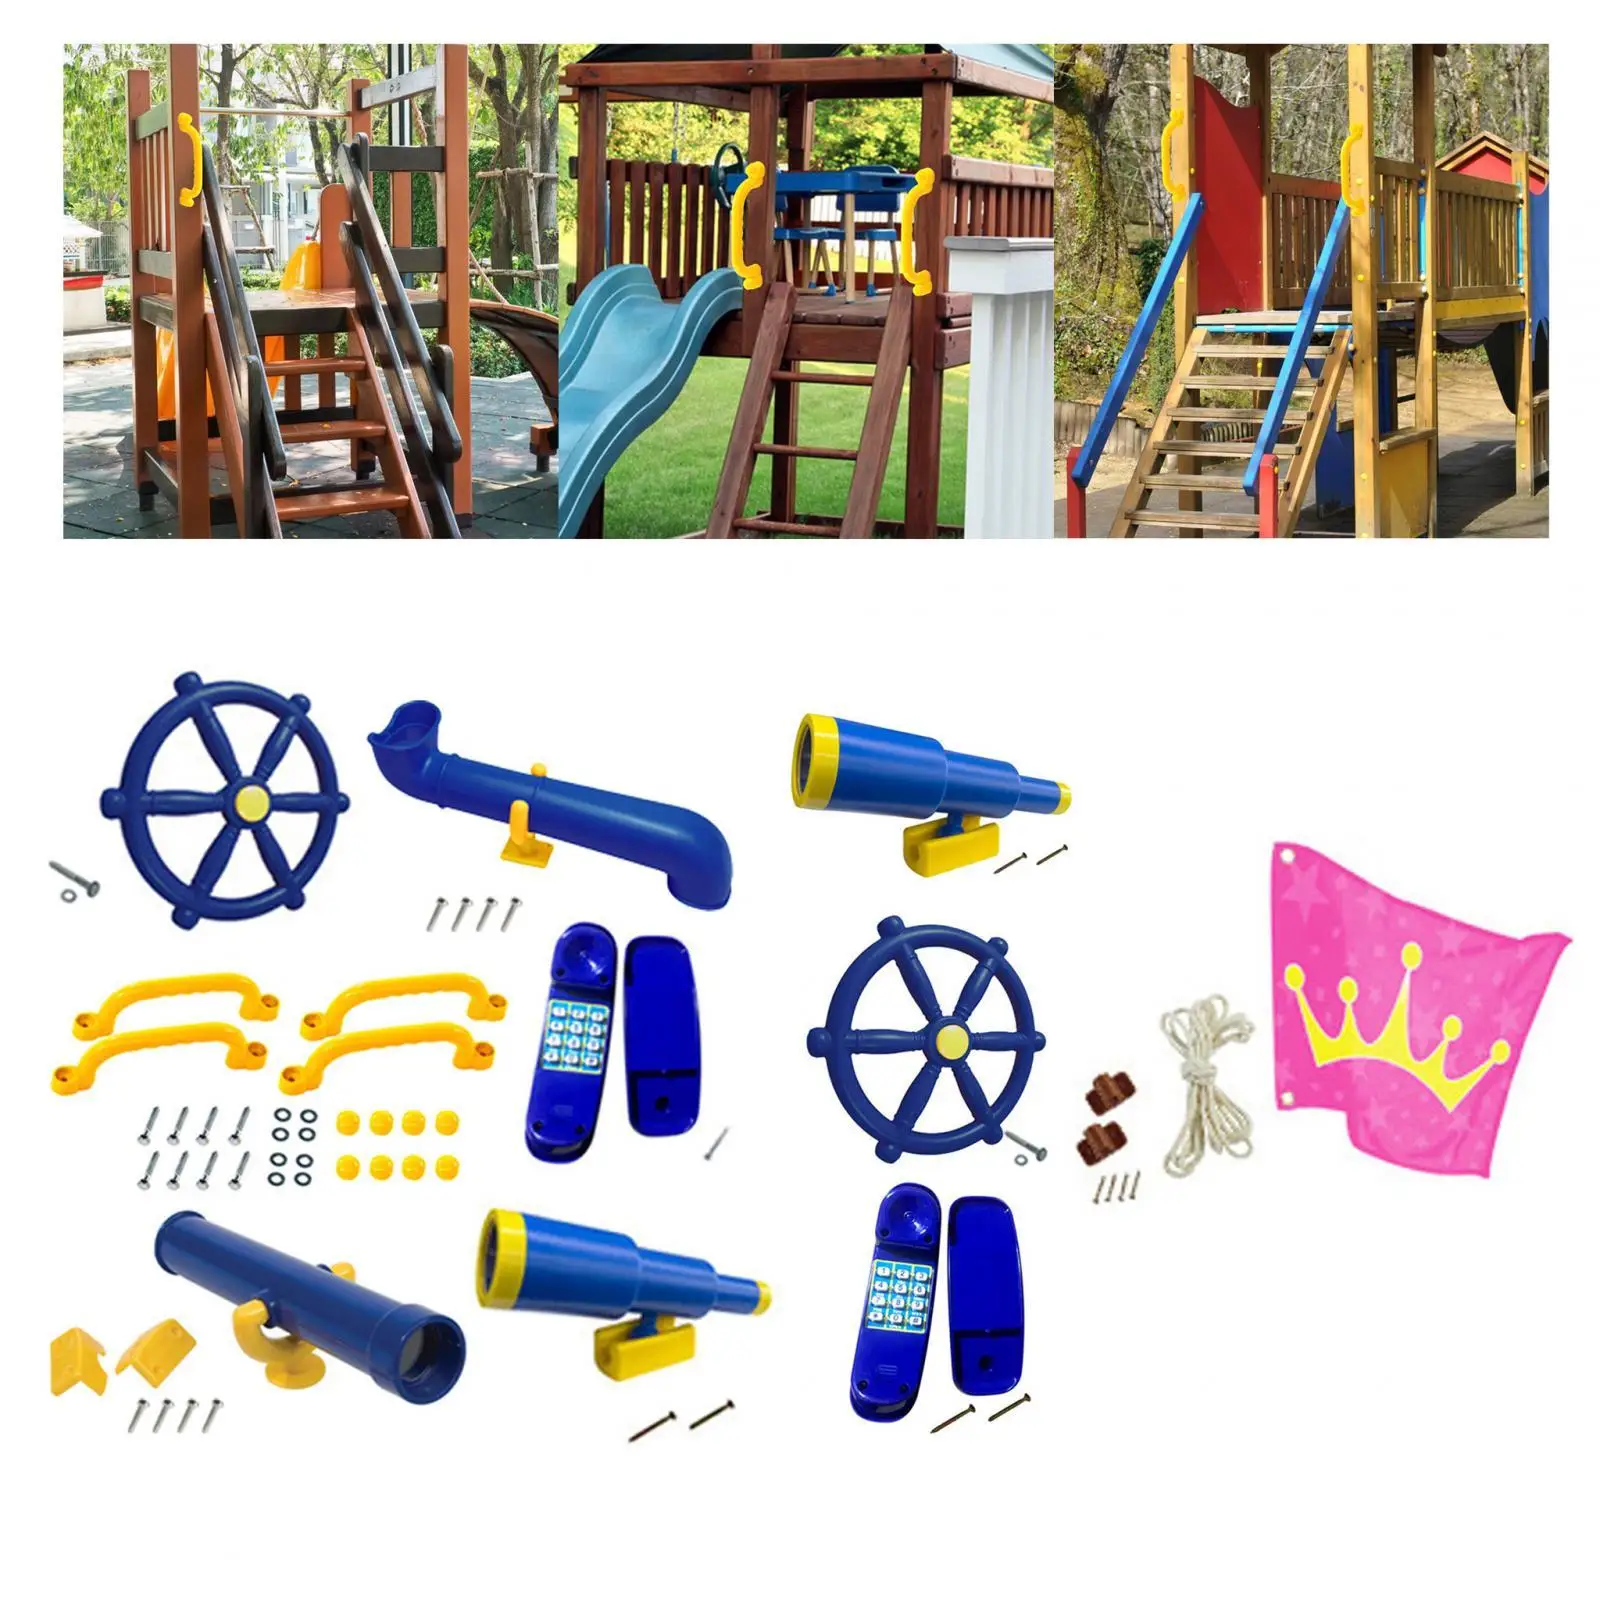 Playground Accessories Easy to Install Pirate Telescope Pirate Ship Parts for Backyard Tree House Jungle Play House Children